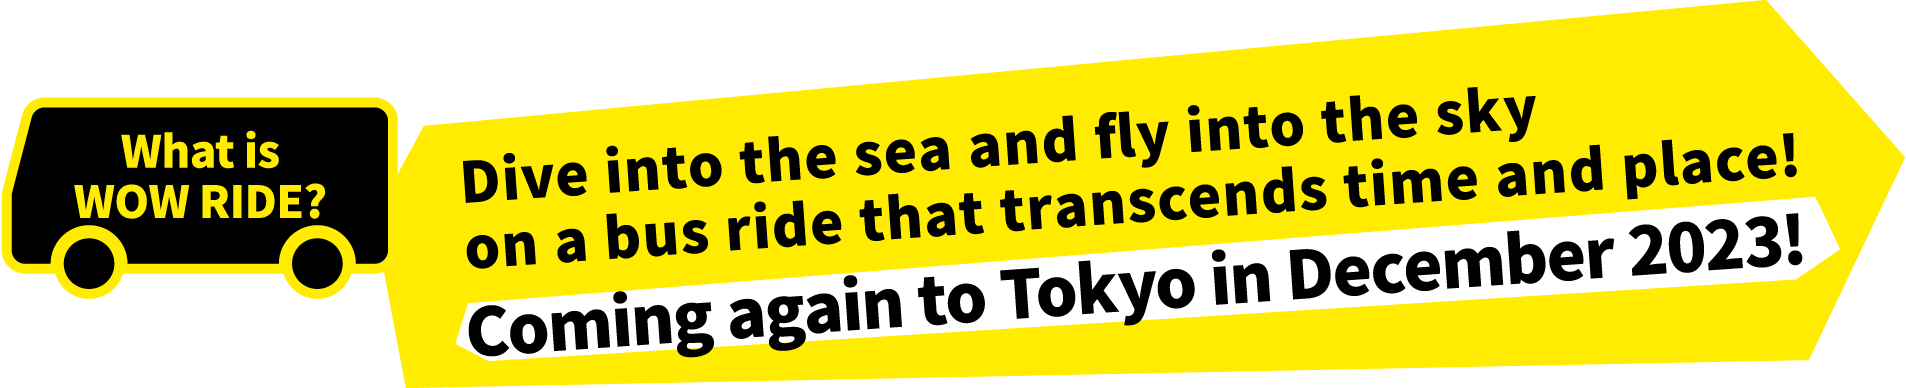 Dive into the sea and fly into the sky
        on a bus ride that transcends time and place! Coming again to Tokyo in December 2023!